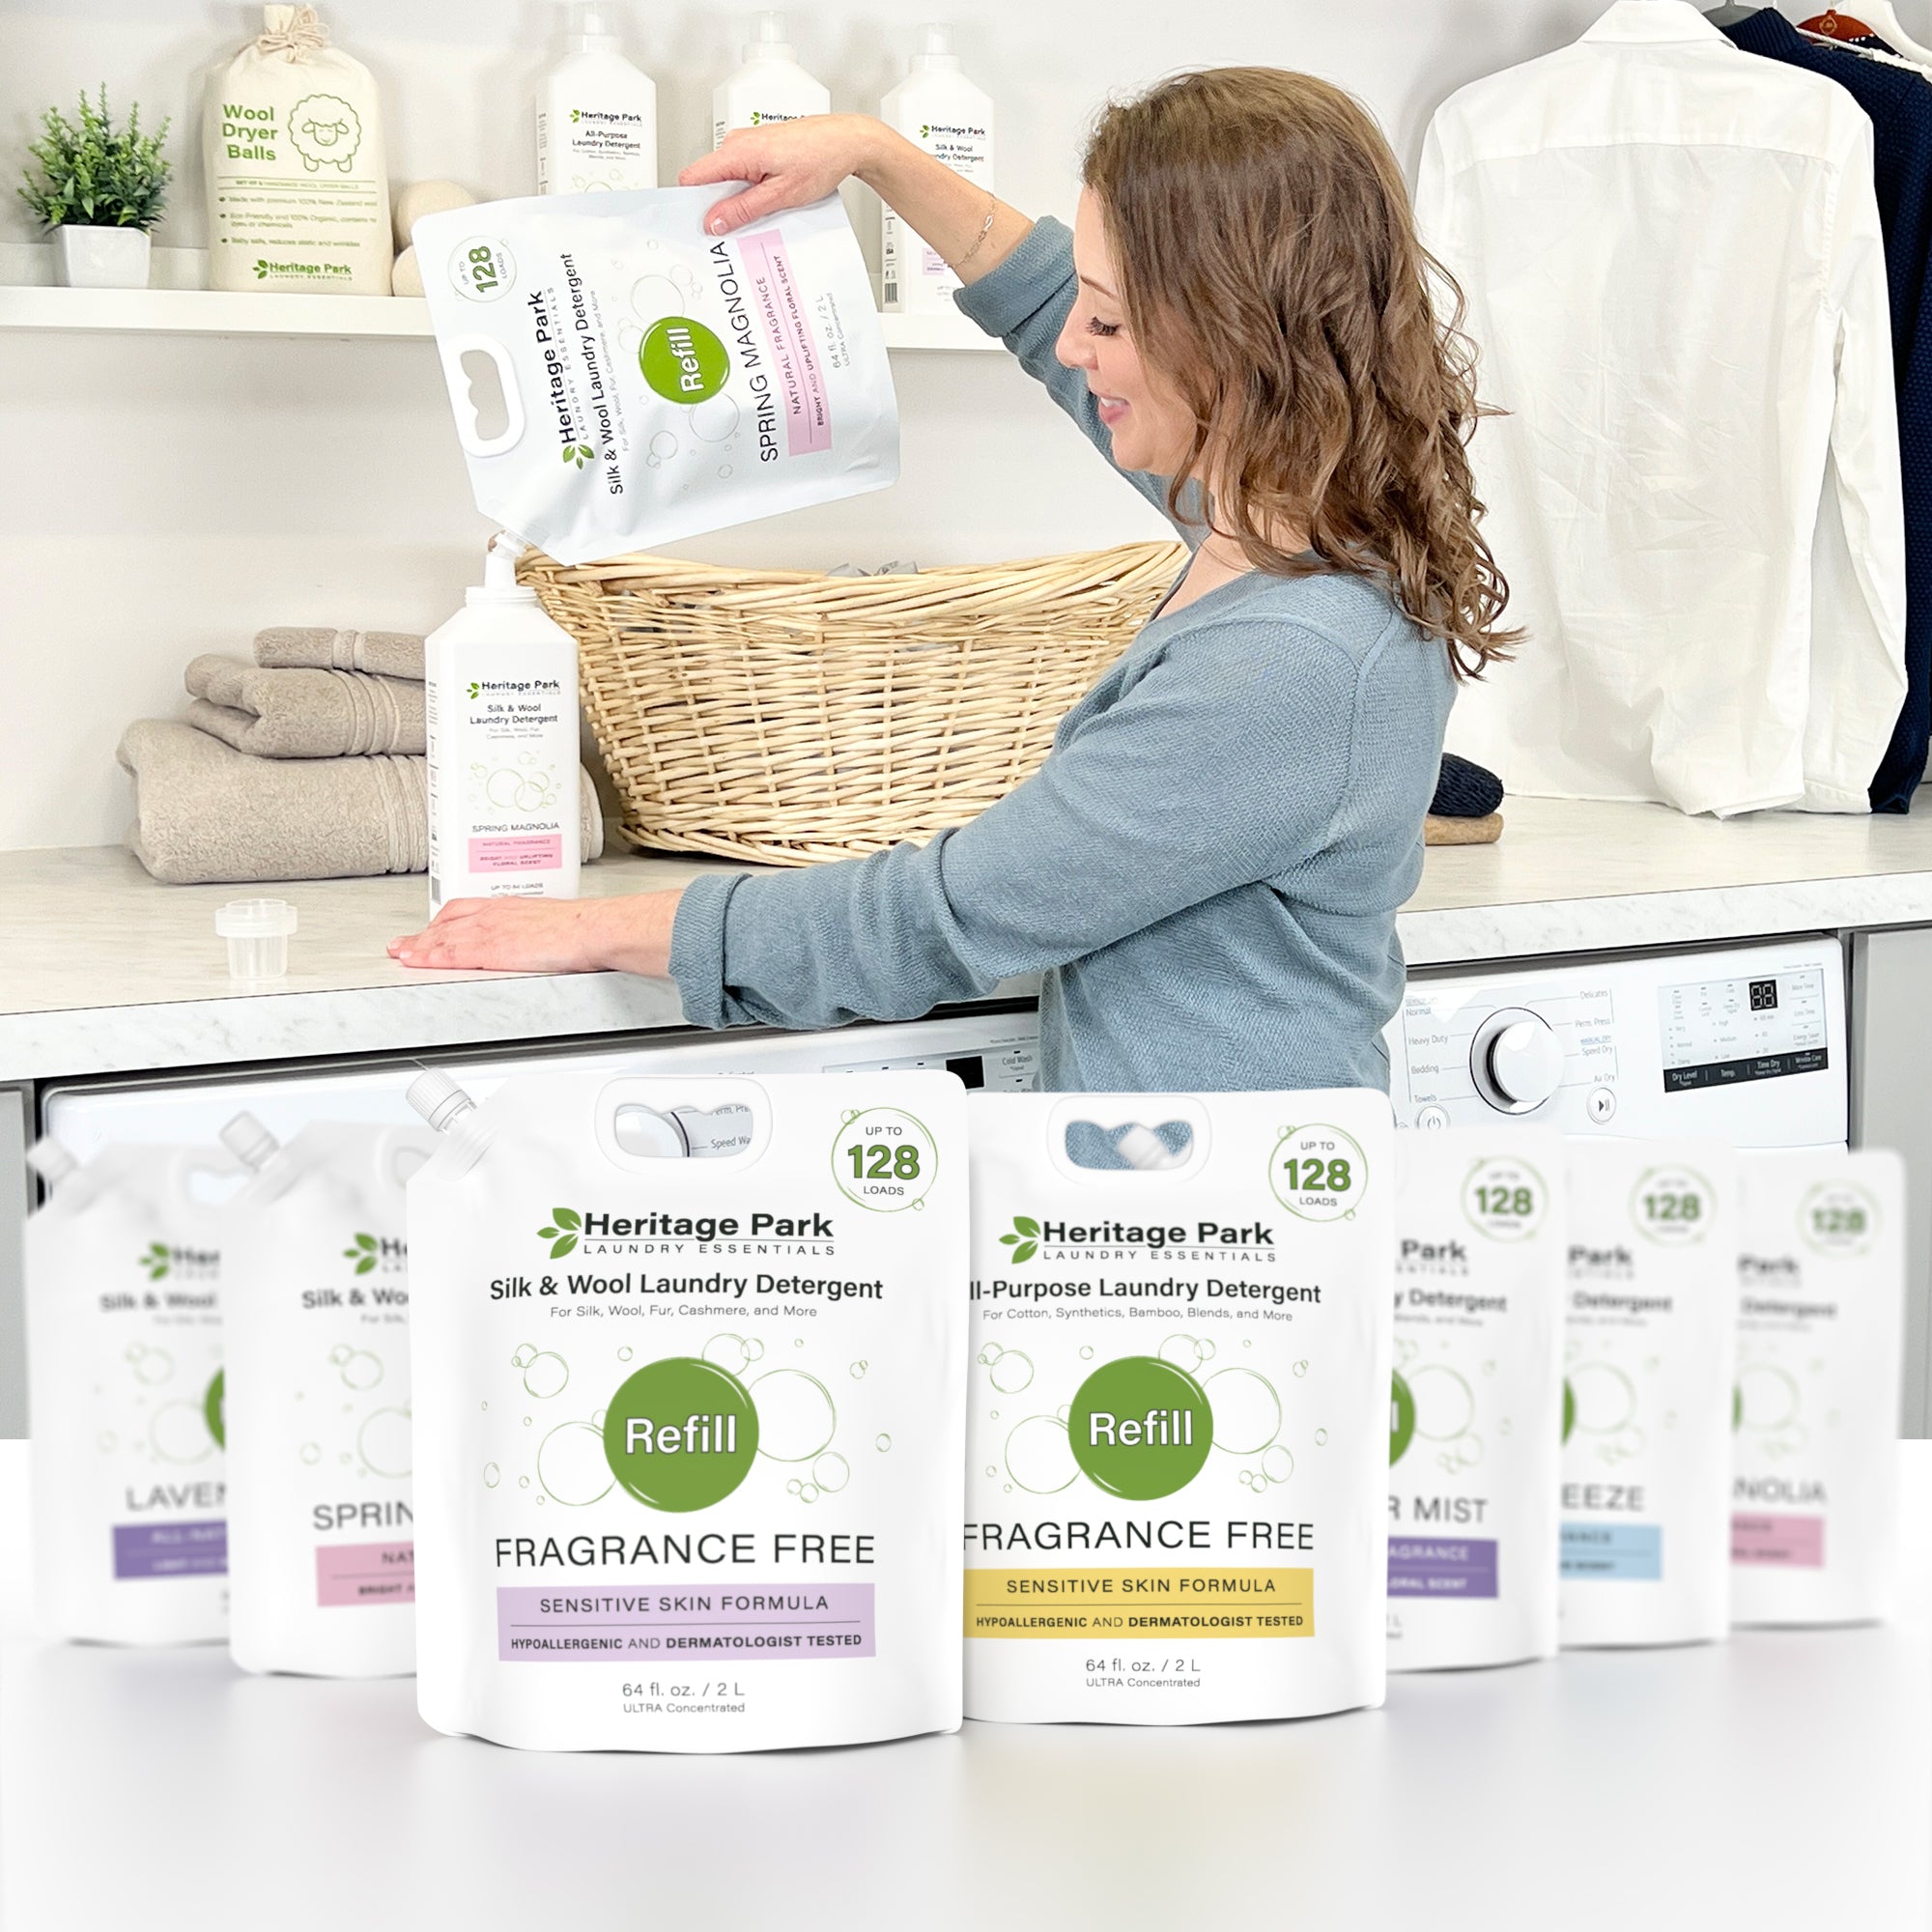 All About Hypoallergenic Laundry Detergent from Heritage Park Laundry -  Heritage Park Laundry Essentials